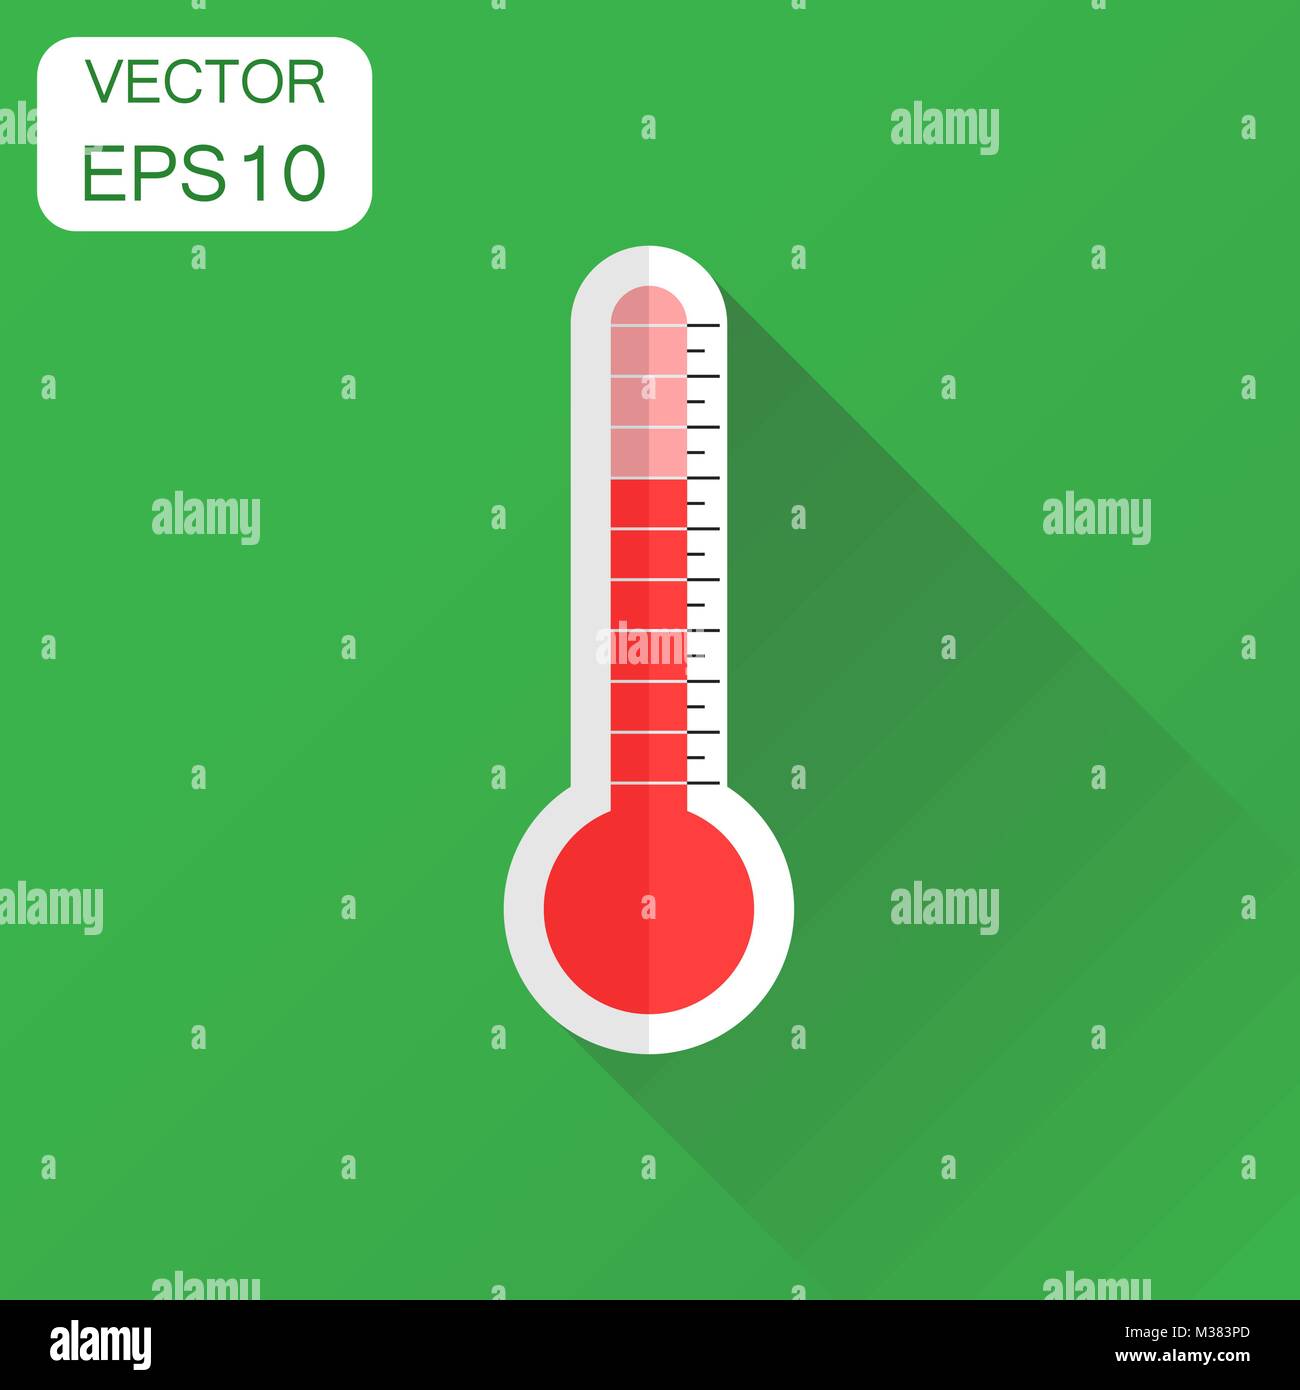 Thermometer icon. Business concept goal pictogram. Vector illustration on green background with long shadow. Stock Vector